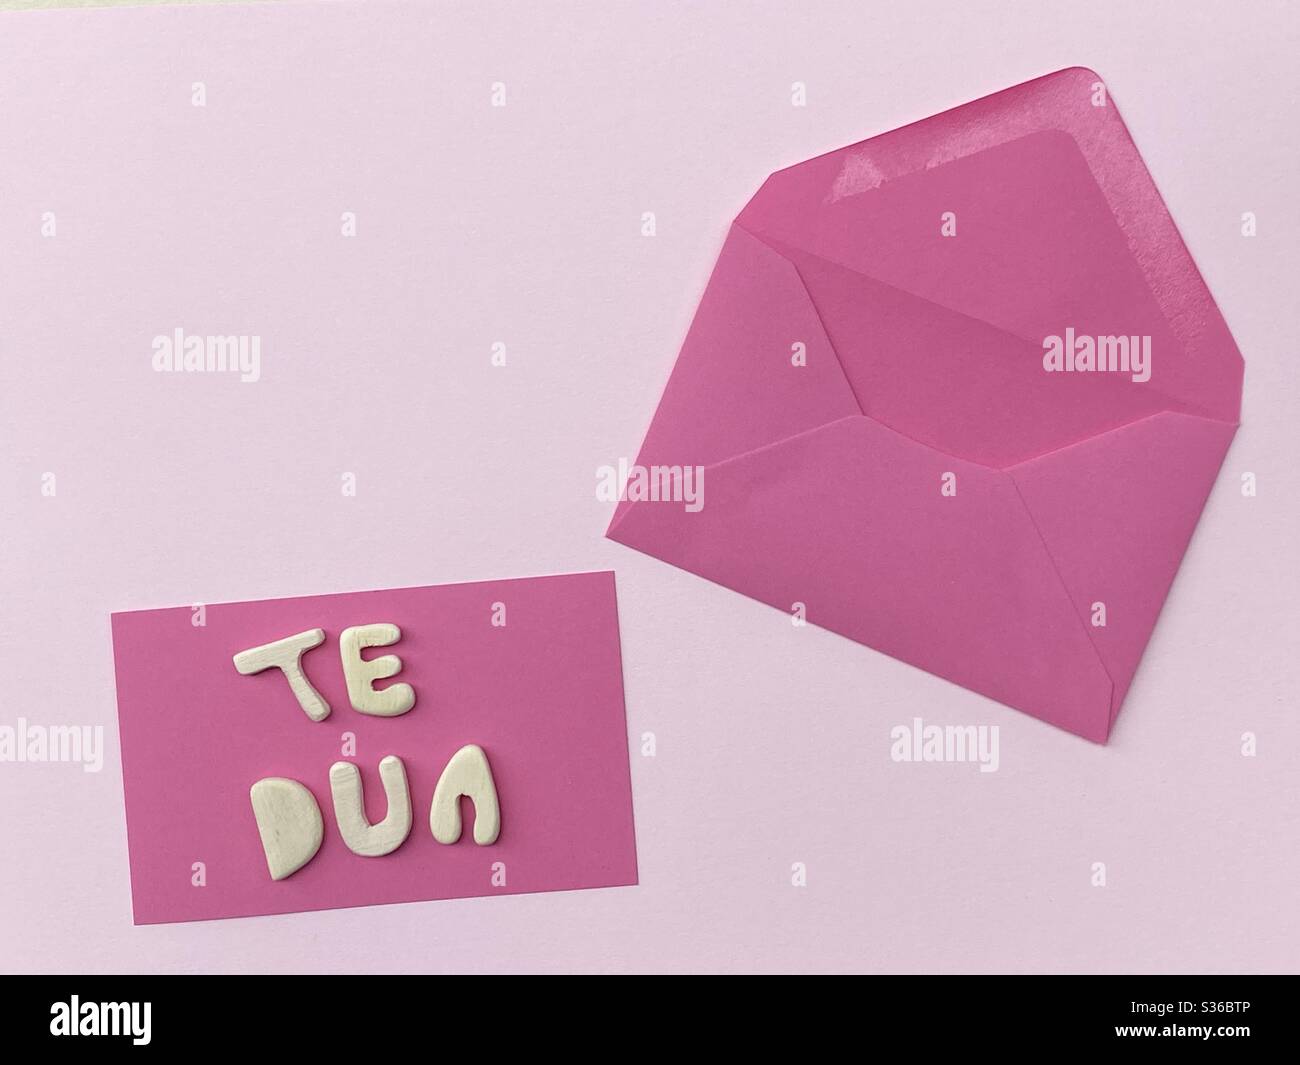 Te dua, albanian text meaning I love you composed with handmade wooden letters over pink card Stock Photo